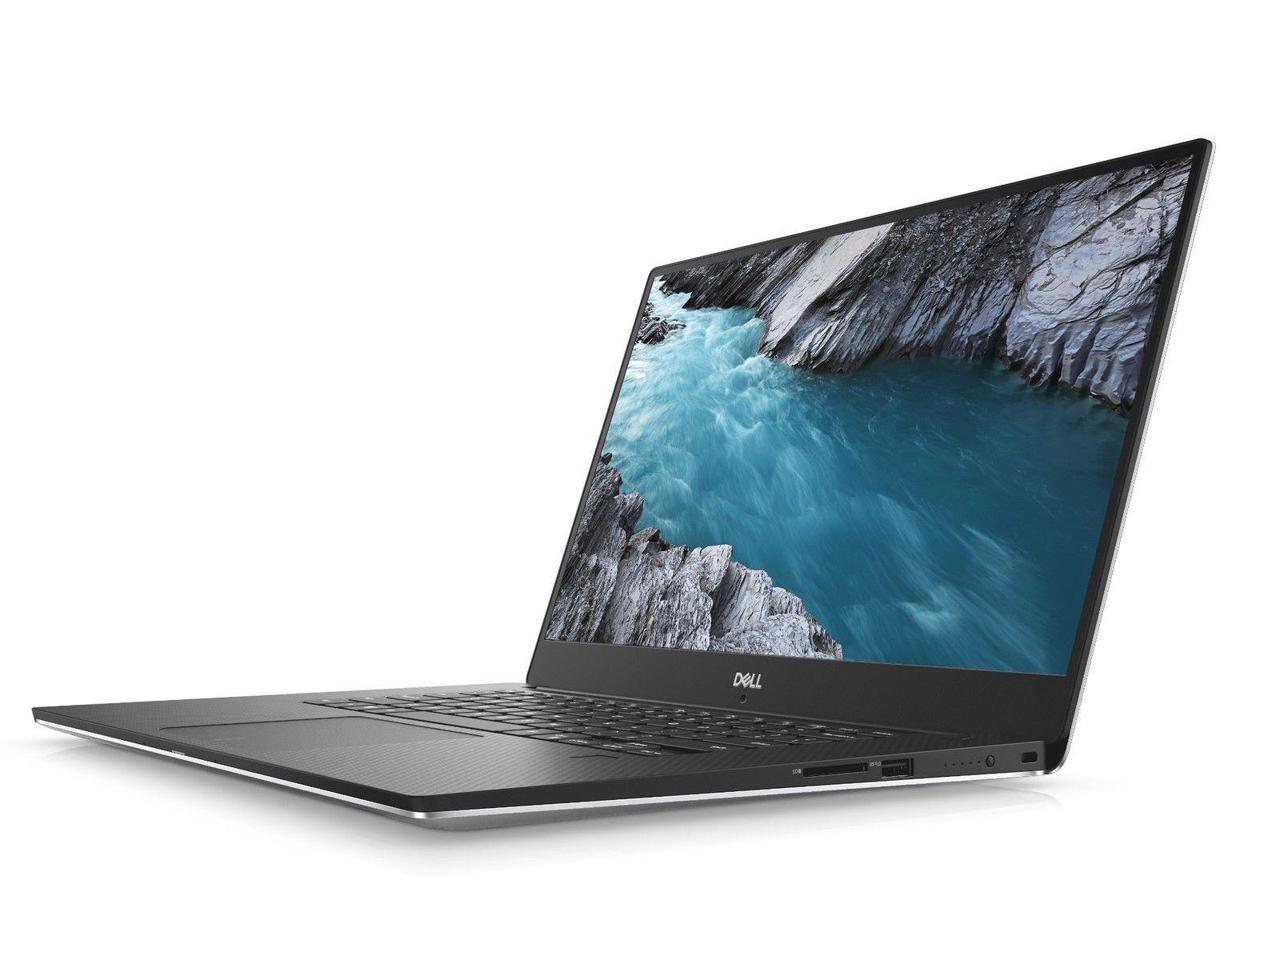 DELL XPS 15 9570 15.6